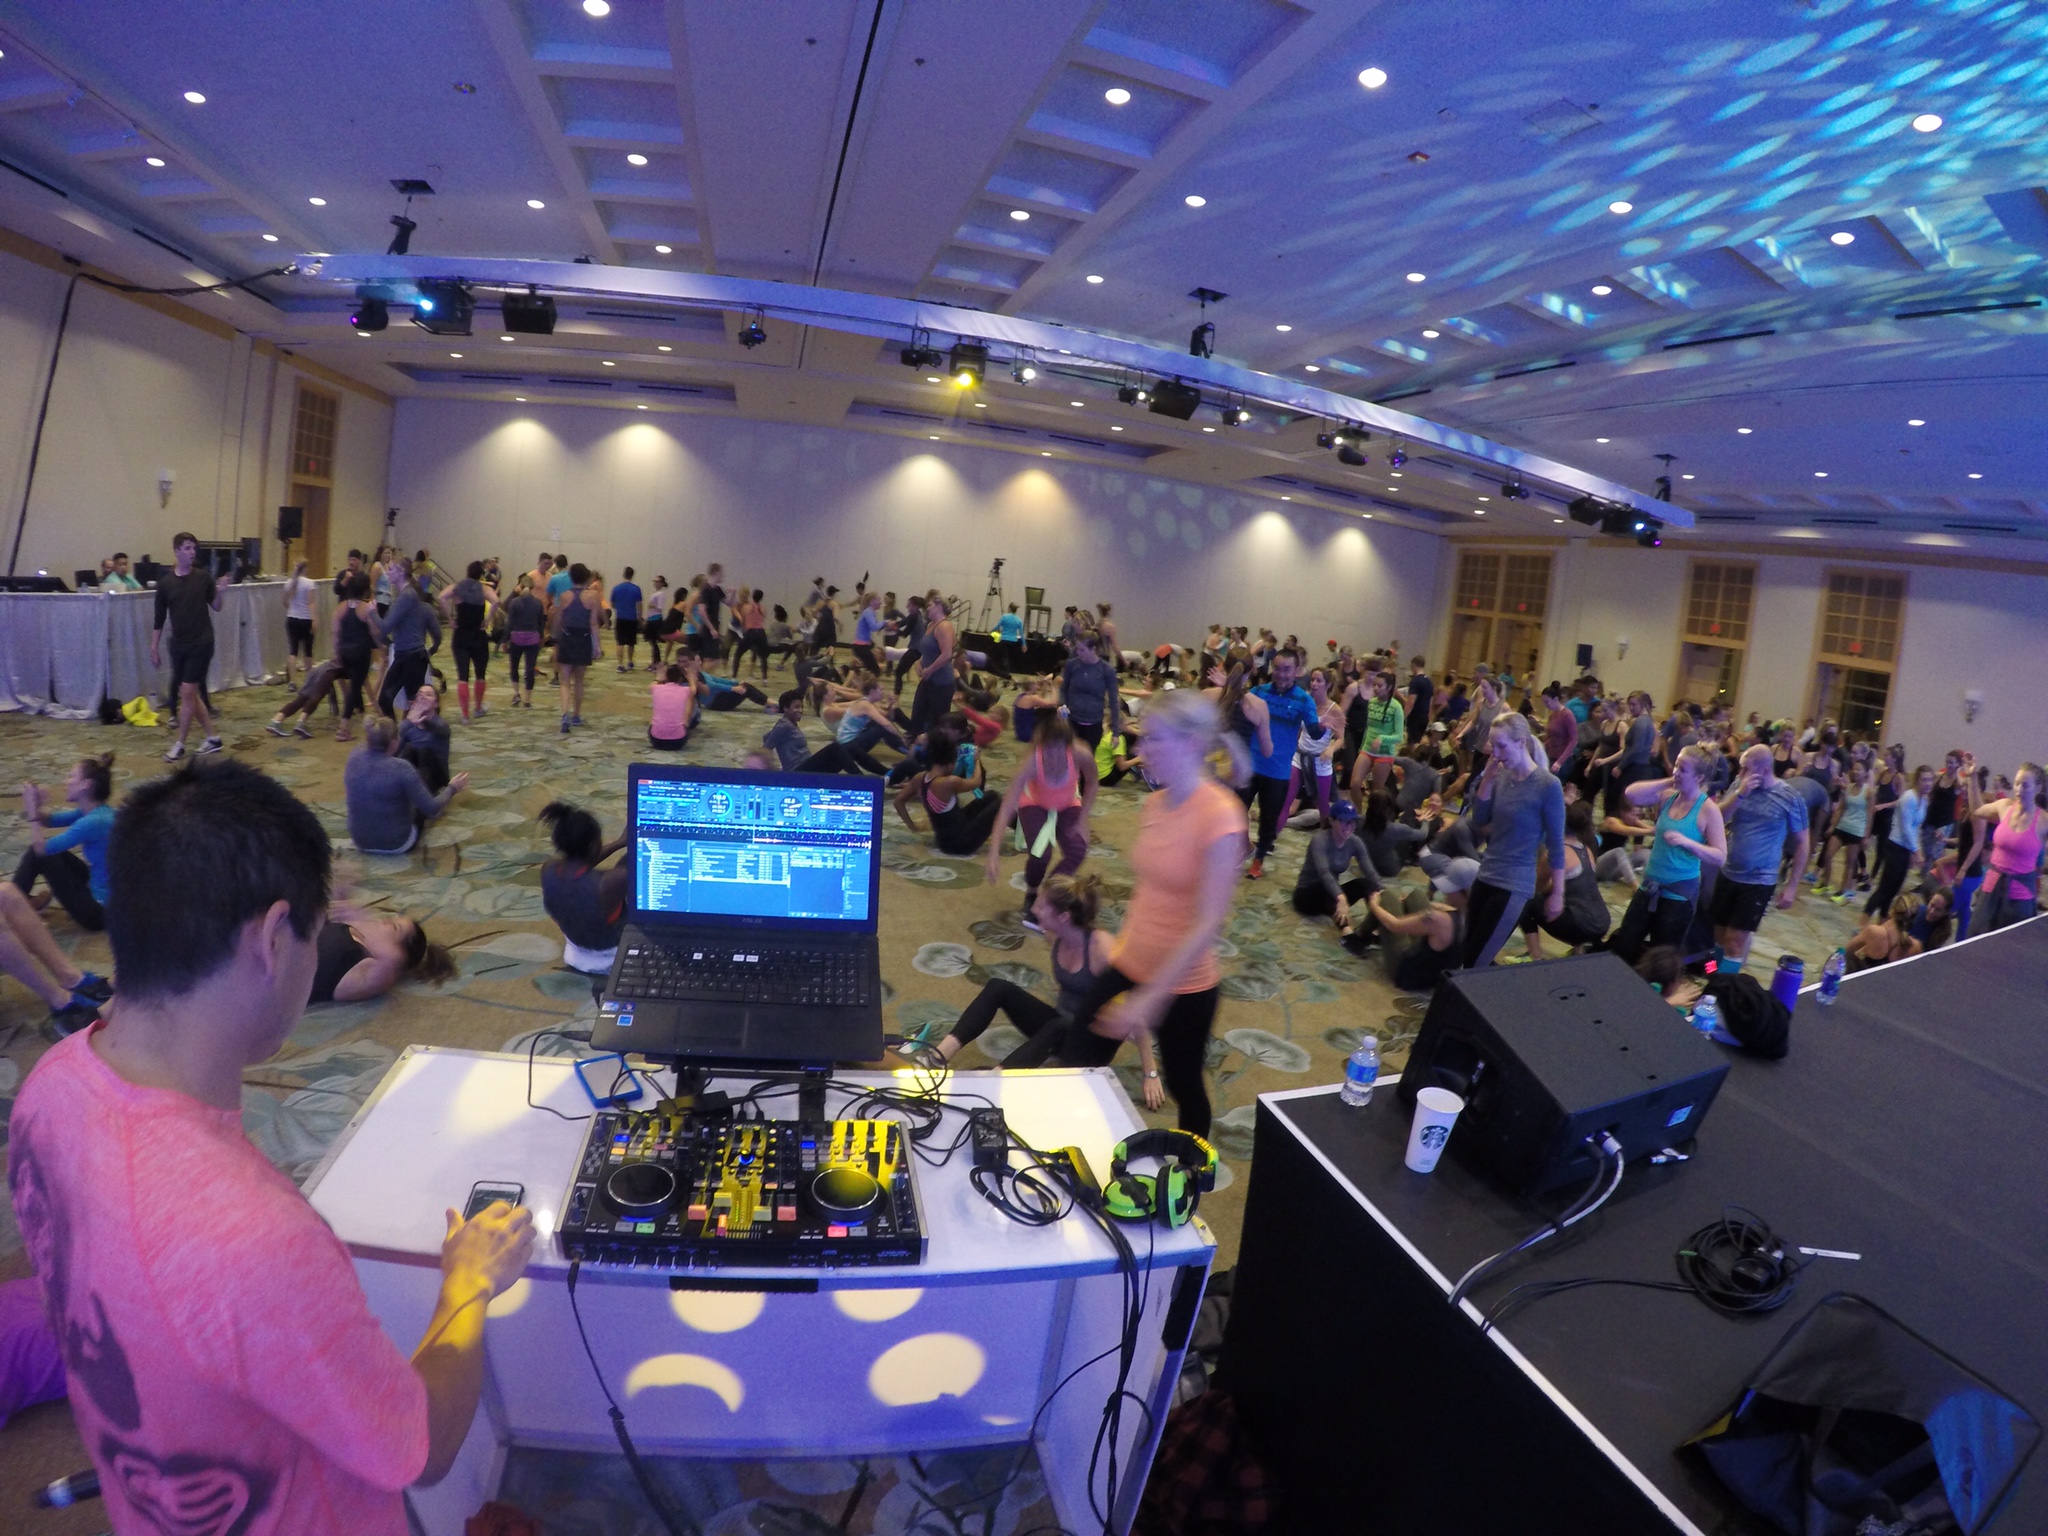   Live DJing a November Project workout at the Lululemon Leadership Conference.&nbsp;  